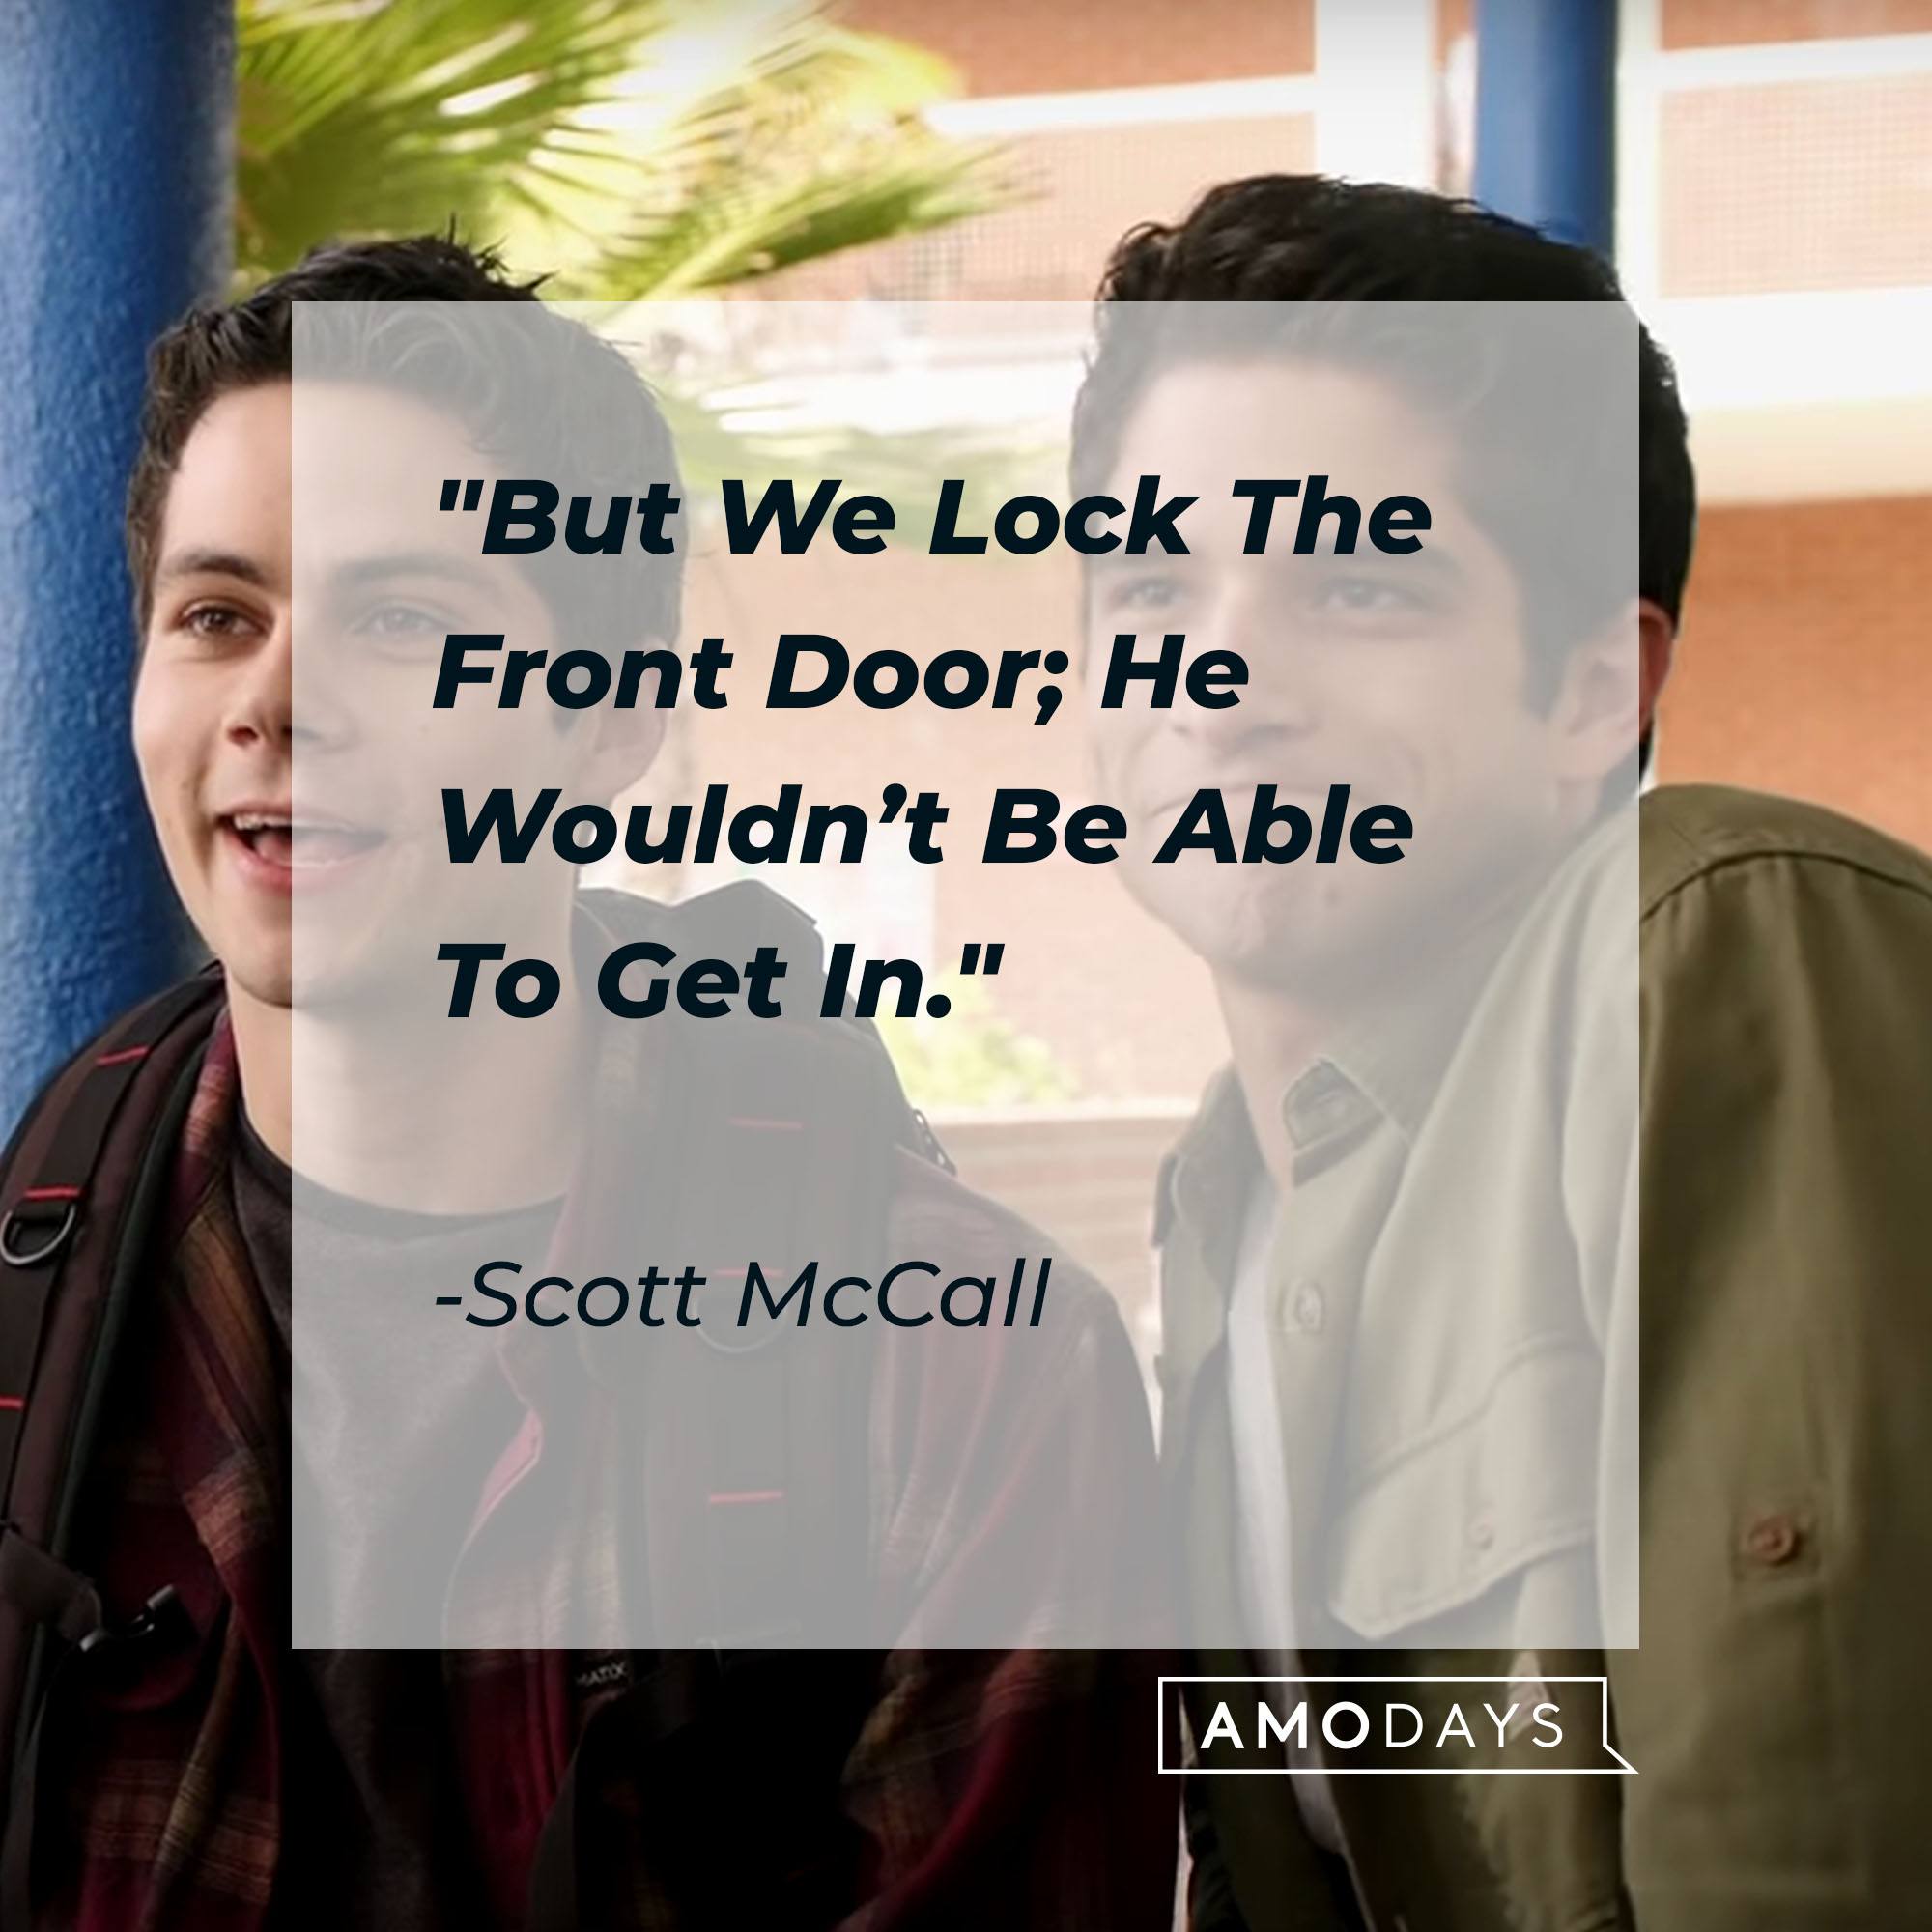 Scott McCall's quote: "But We Lock The Front Door; He Wouldn't Be Able To Get In" | Source: Youtube.com/WolfWatch